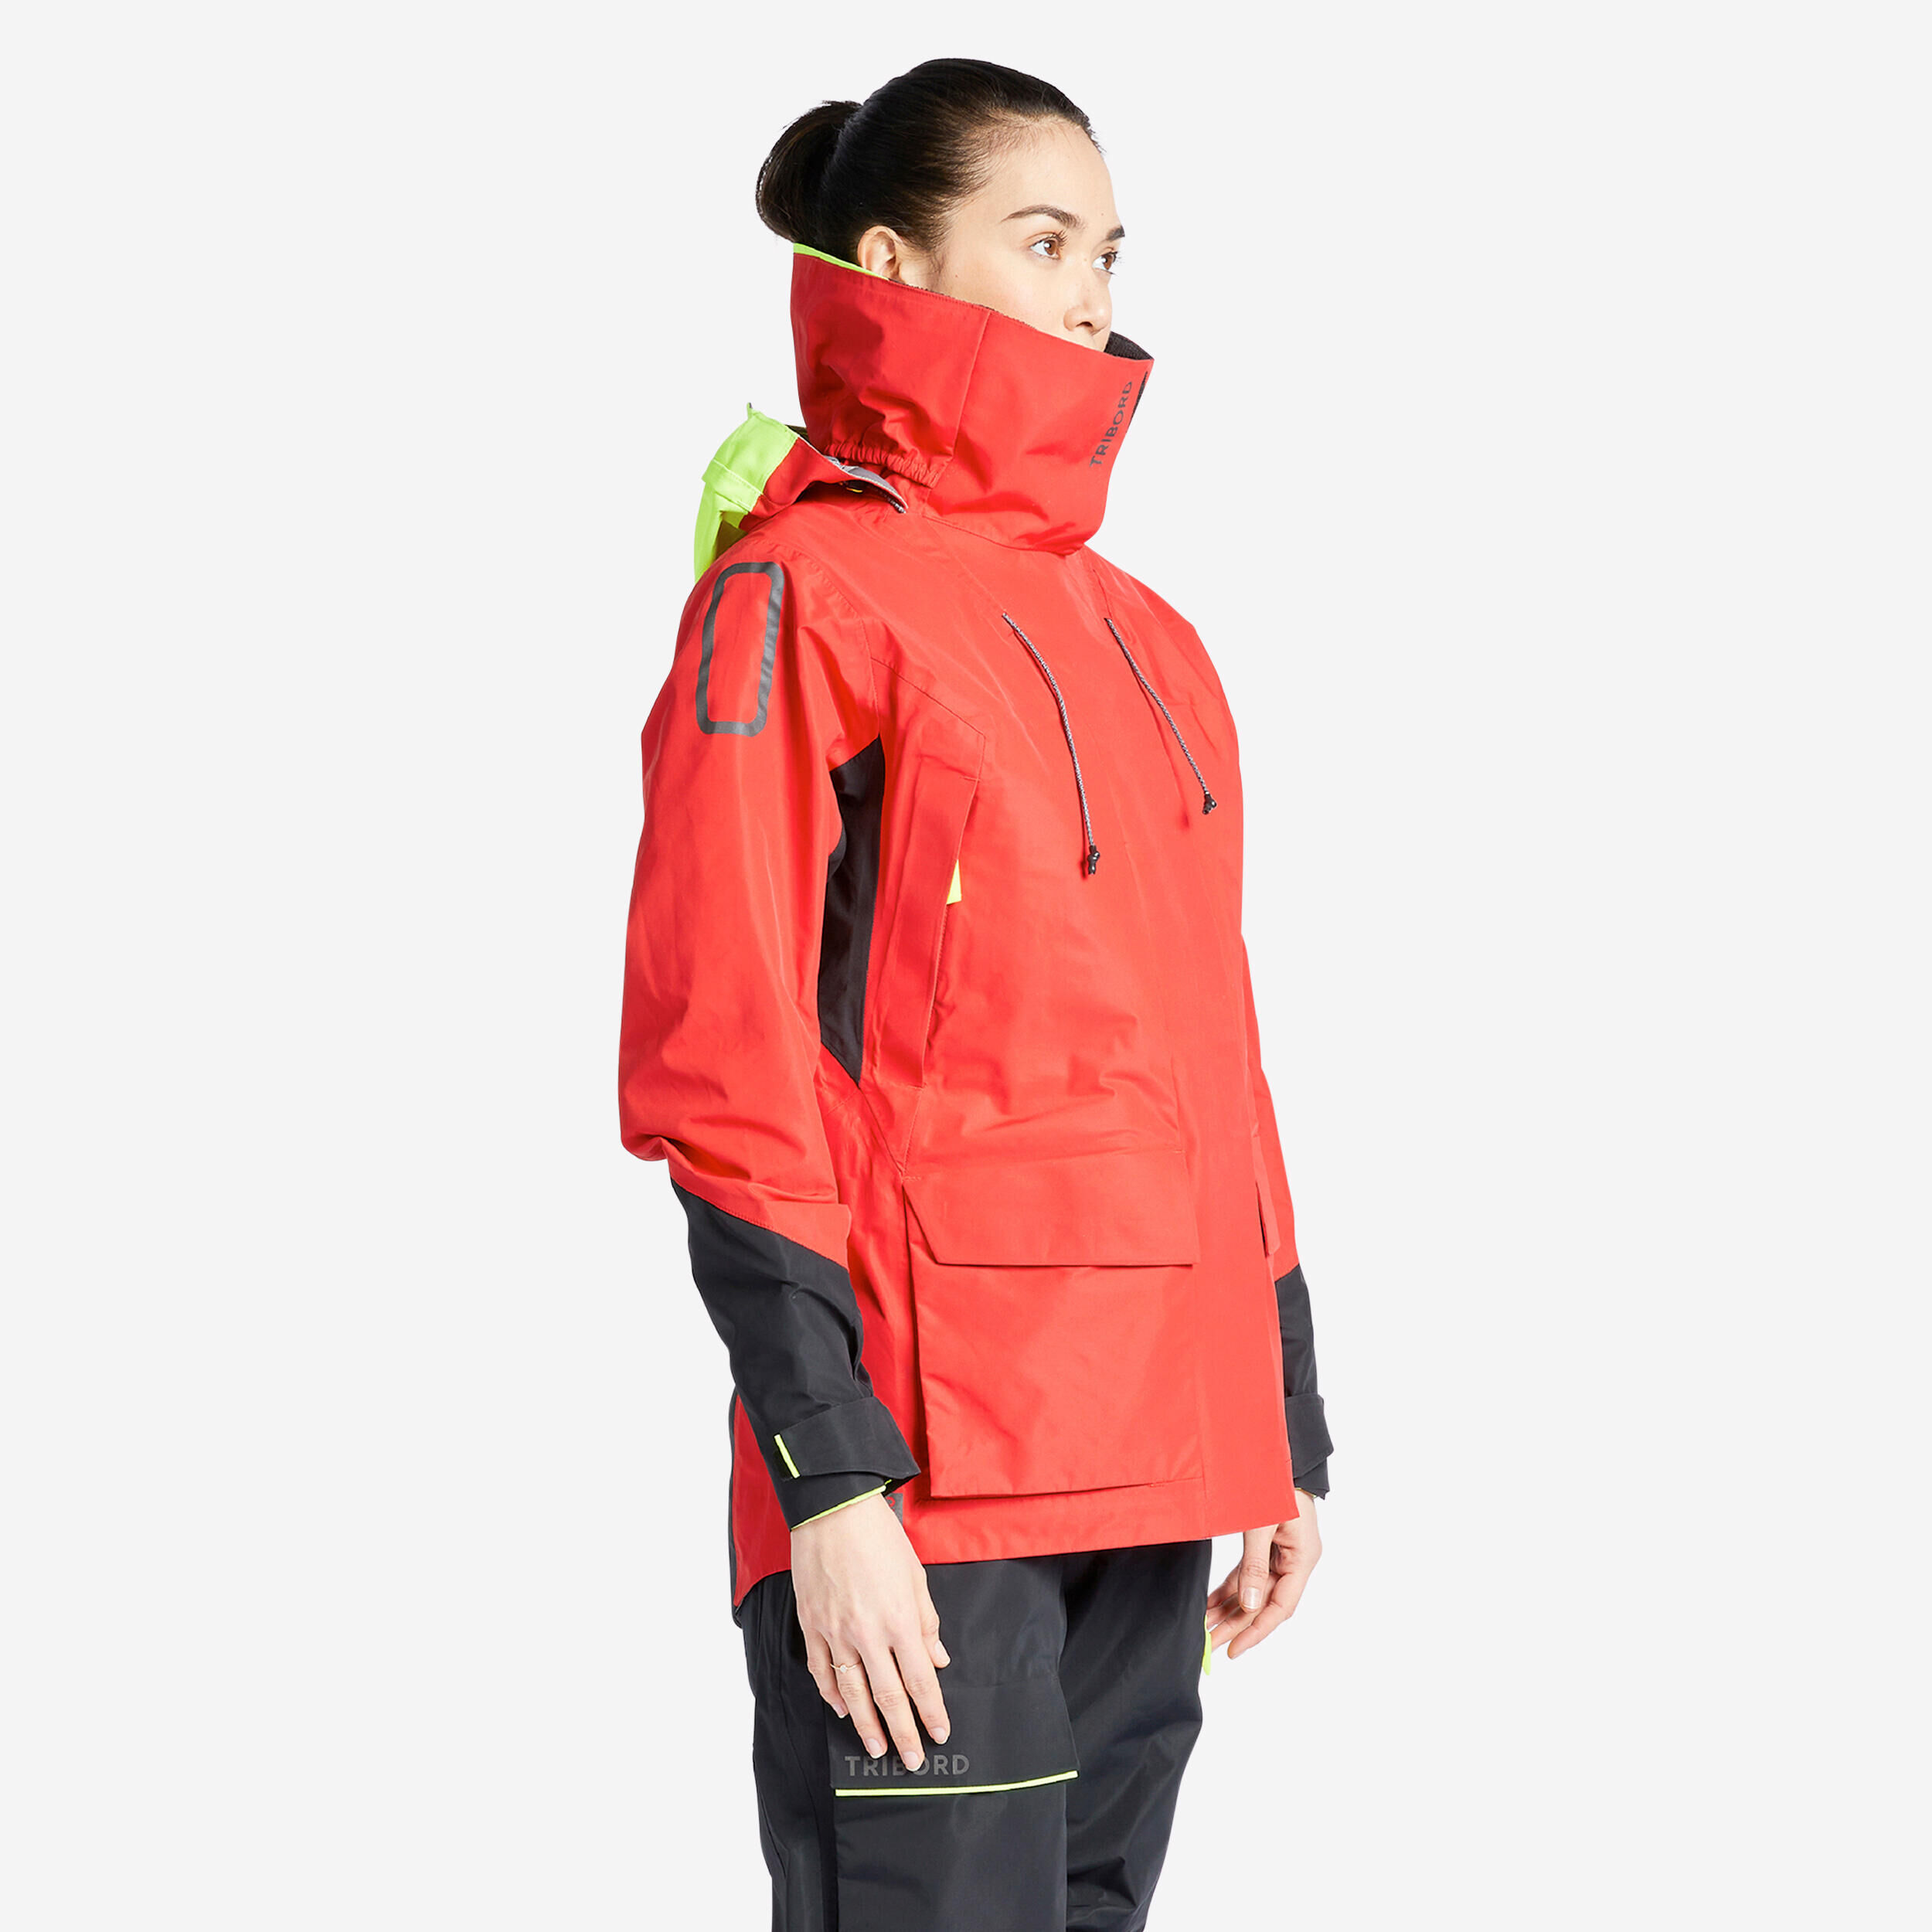 TRIBORD Women’s Sailing Jacket Offshore 900 - Red